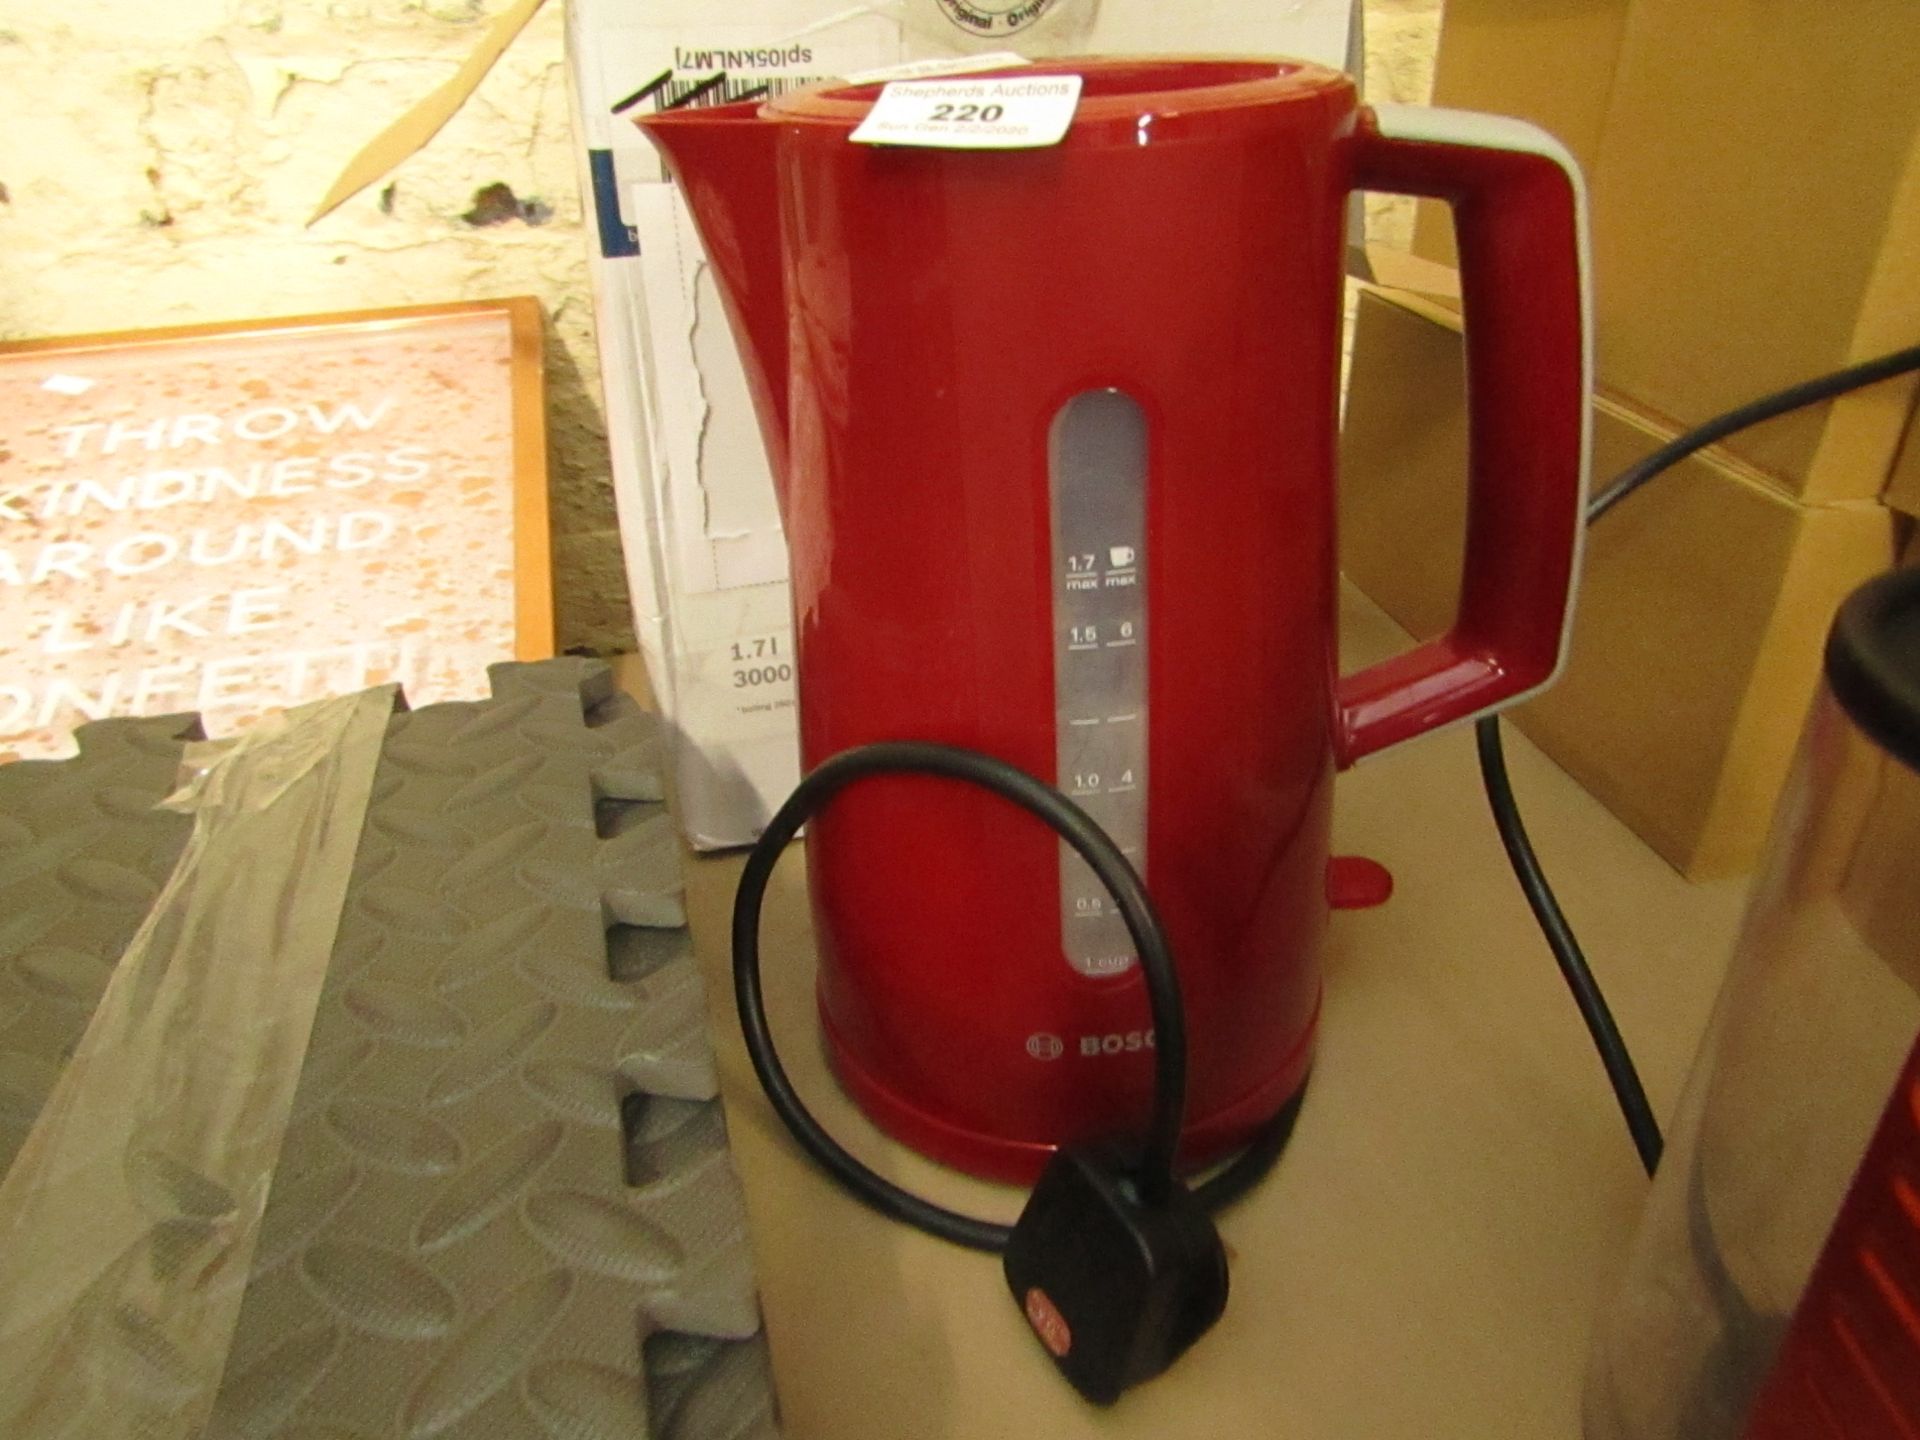 Red Bosch kettle.Powers on & Boxed. This itemhas been used